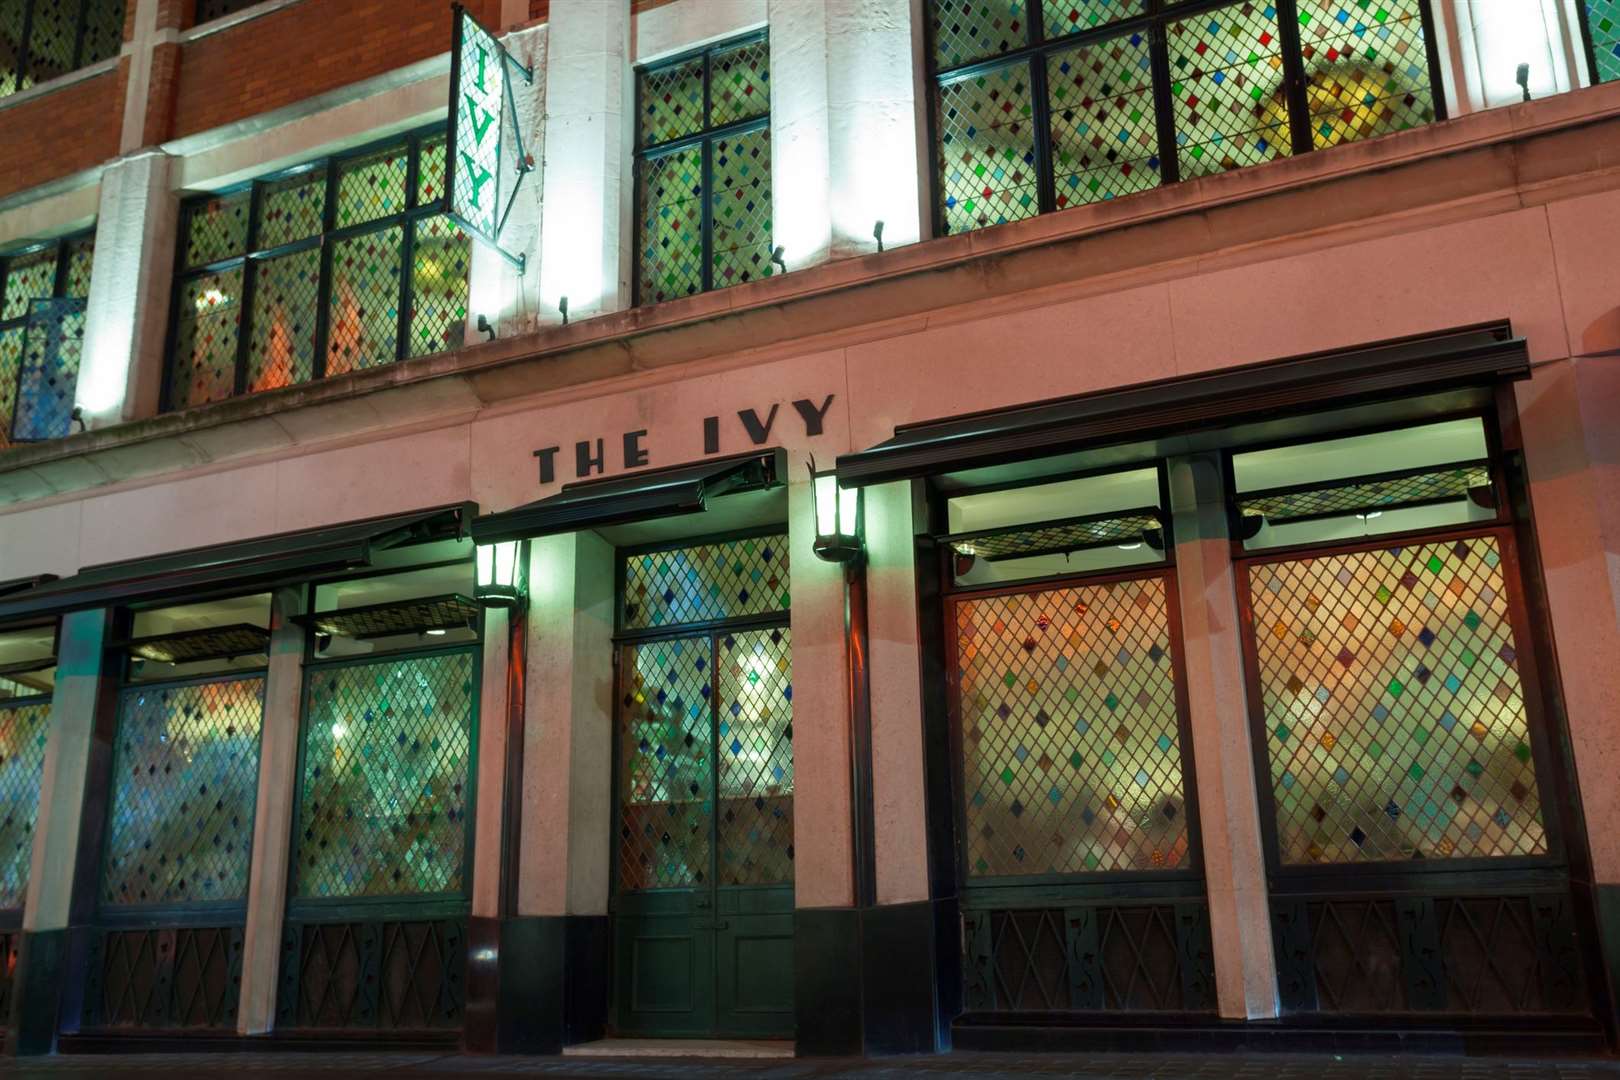 The Ivy restaurant in central London has been a celeb hotspot over the years. Picture credit: iStock / kelvinjay